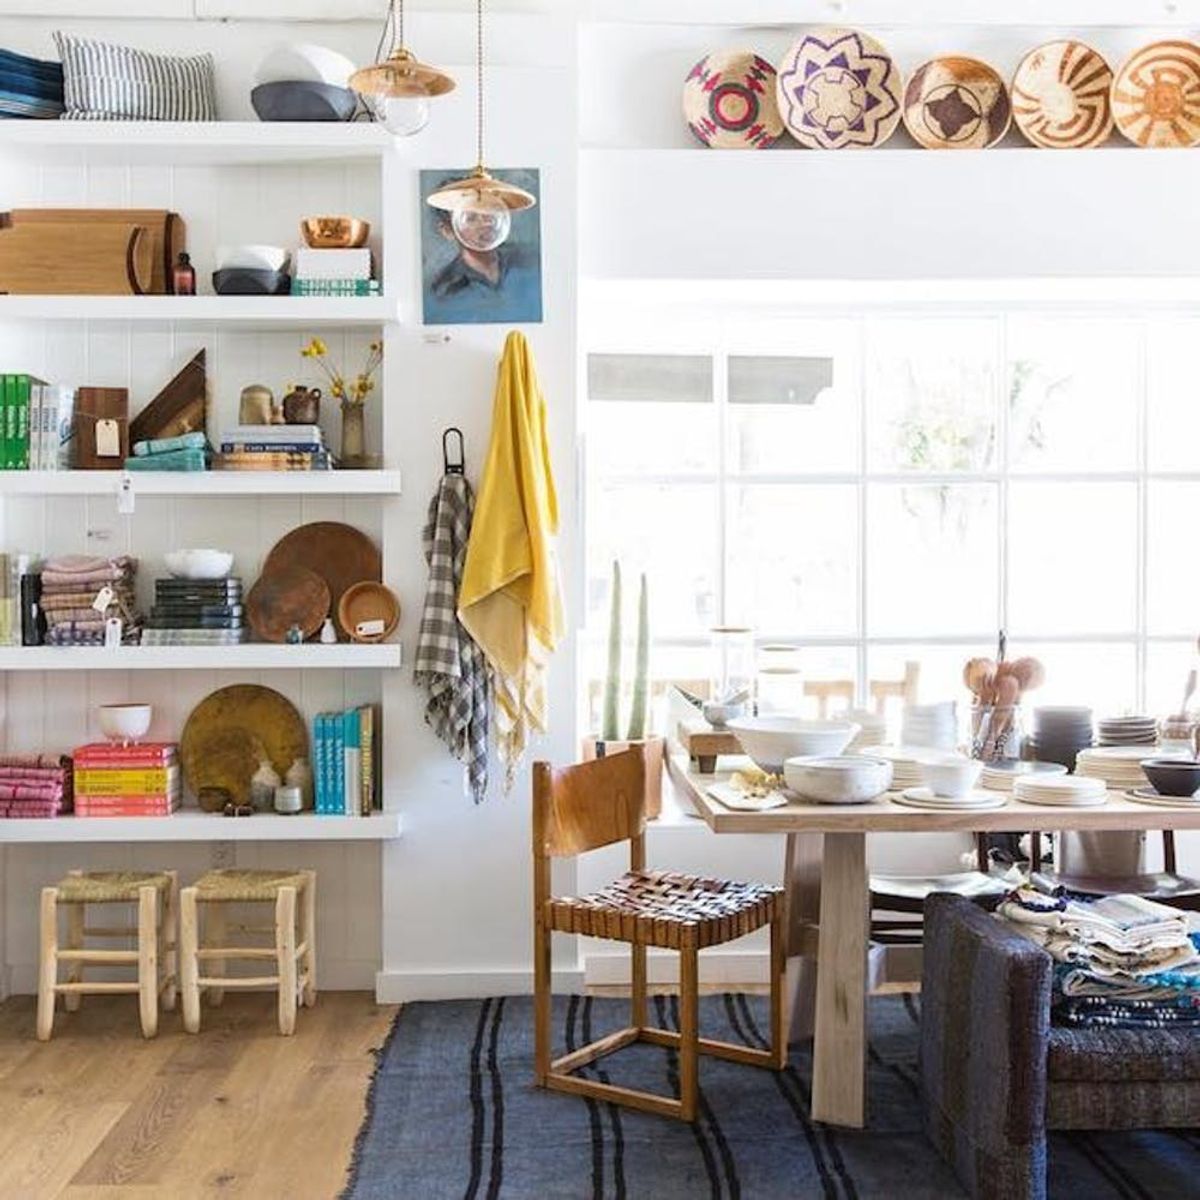 16 Most Instagrammable Home Decor Shops in LA